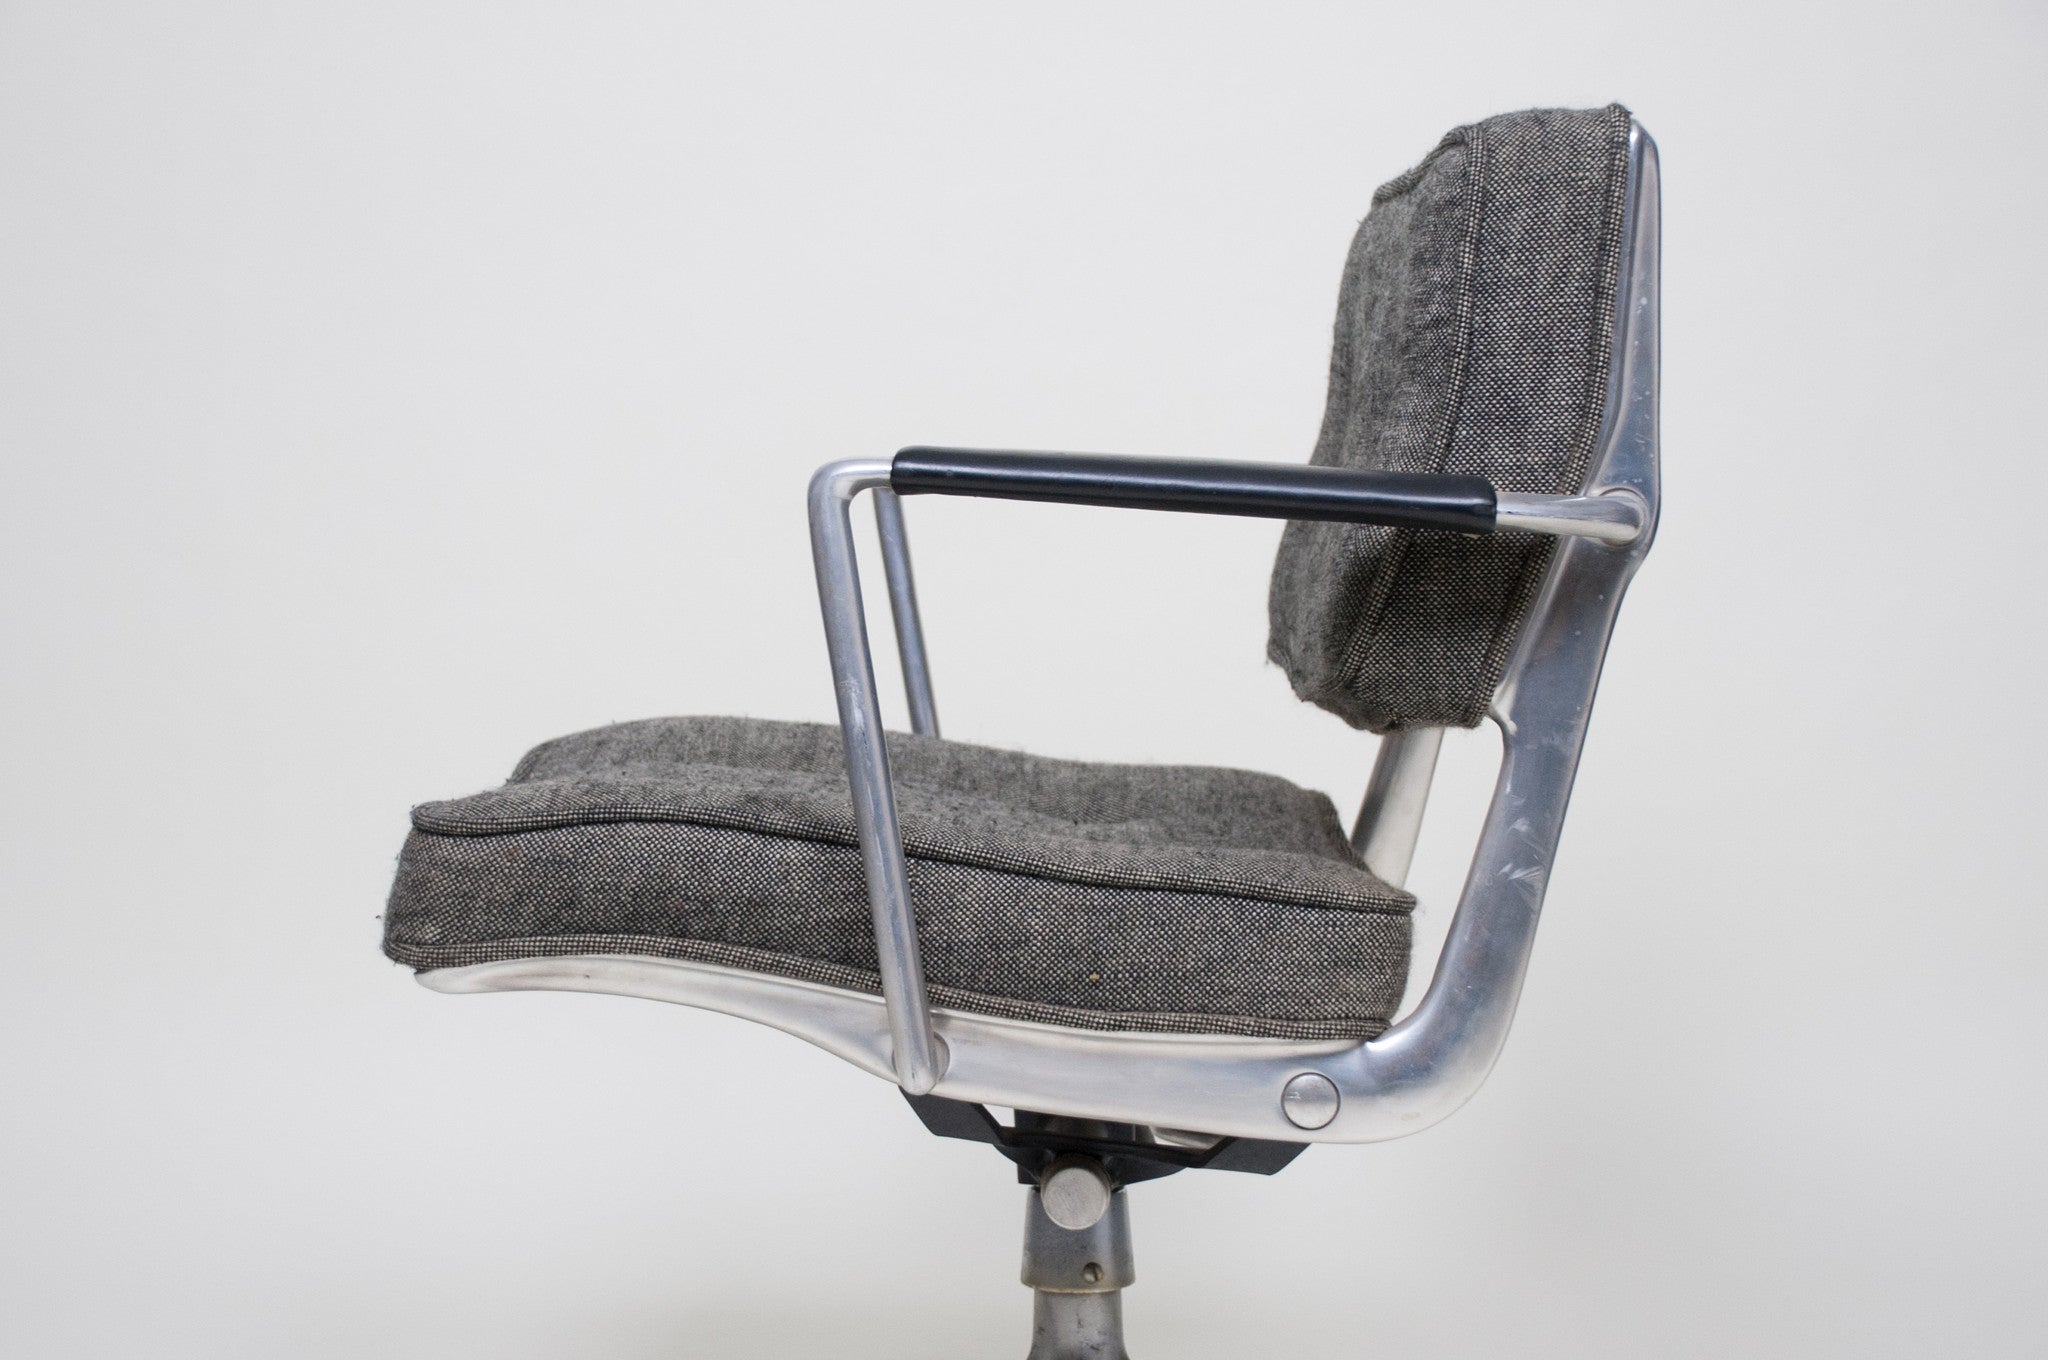 SOLD Museum Quality Rare 1968 Eames Herman Miller Armchair Aluminum Group Girard